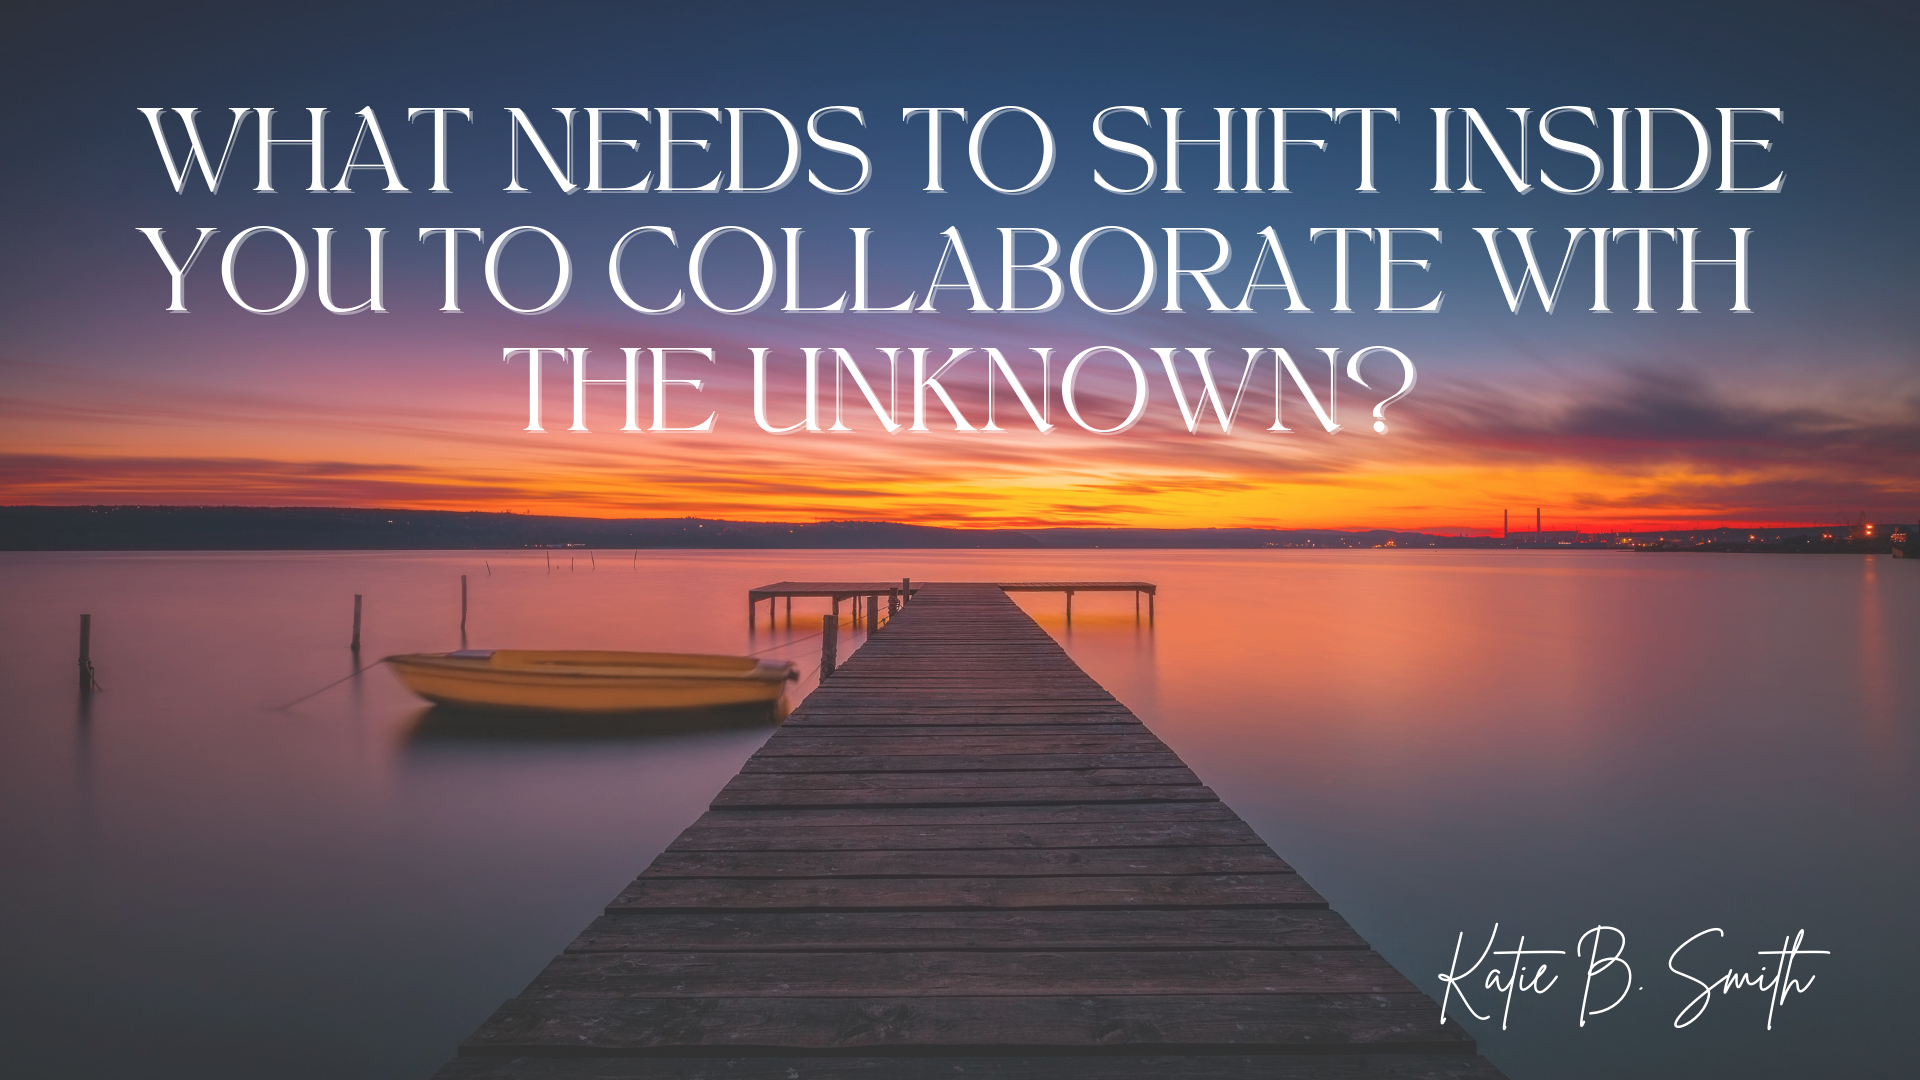 what needs to shift inside you to collaborate with the unknown Katie B Smith